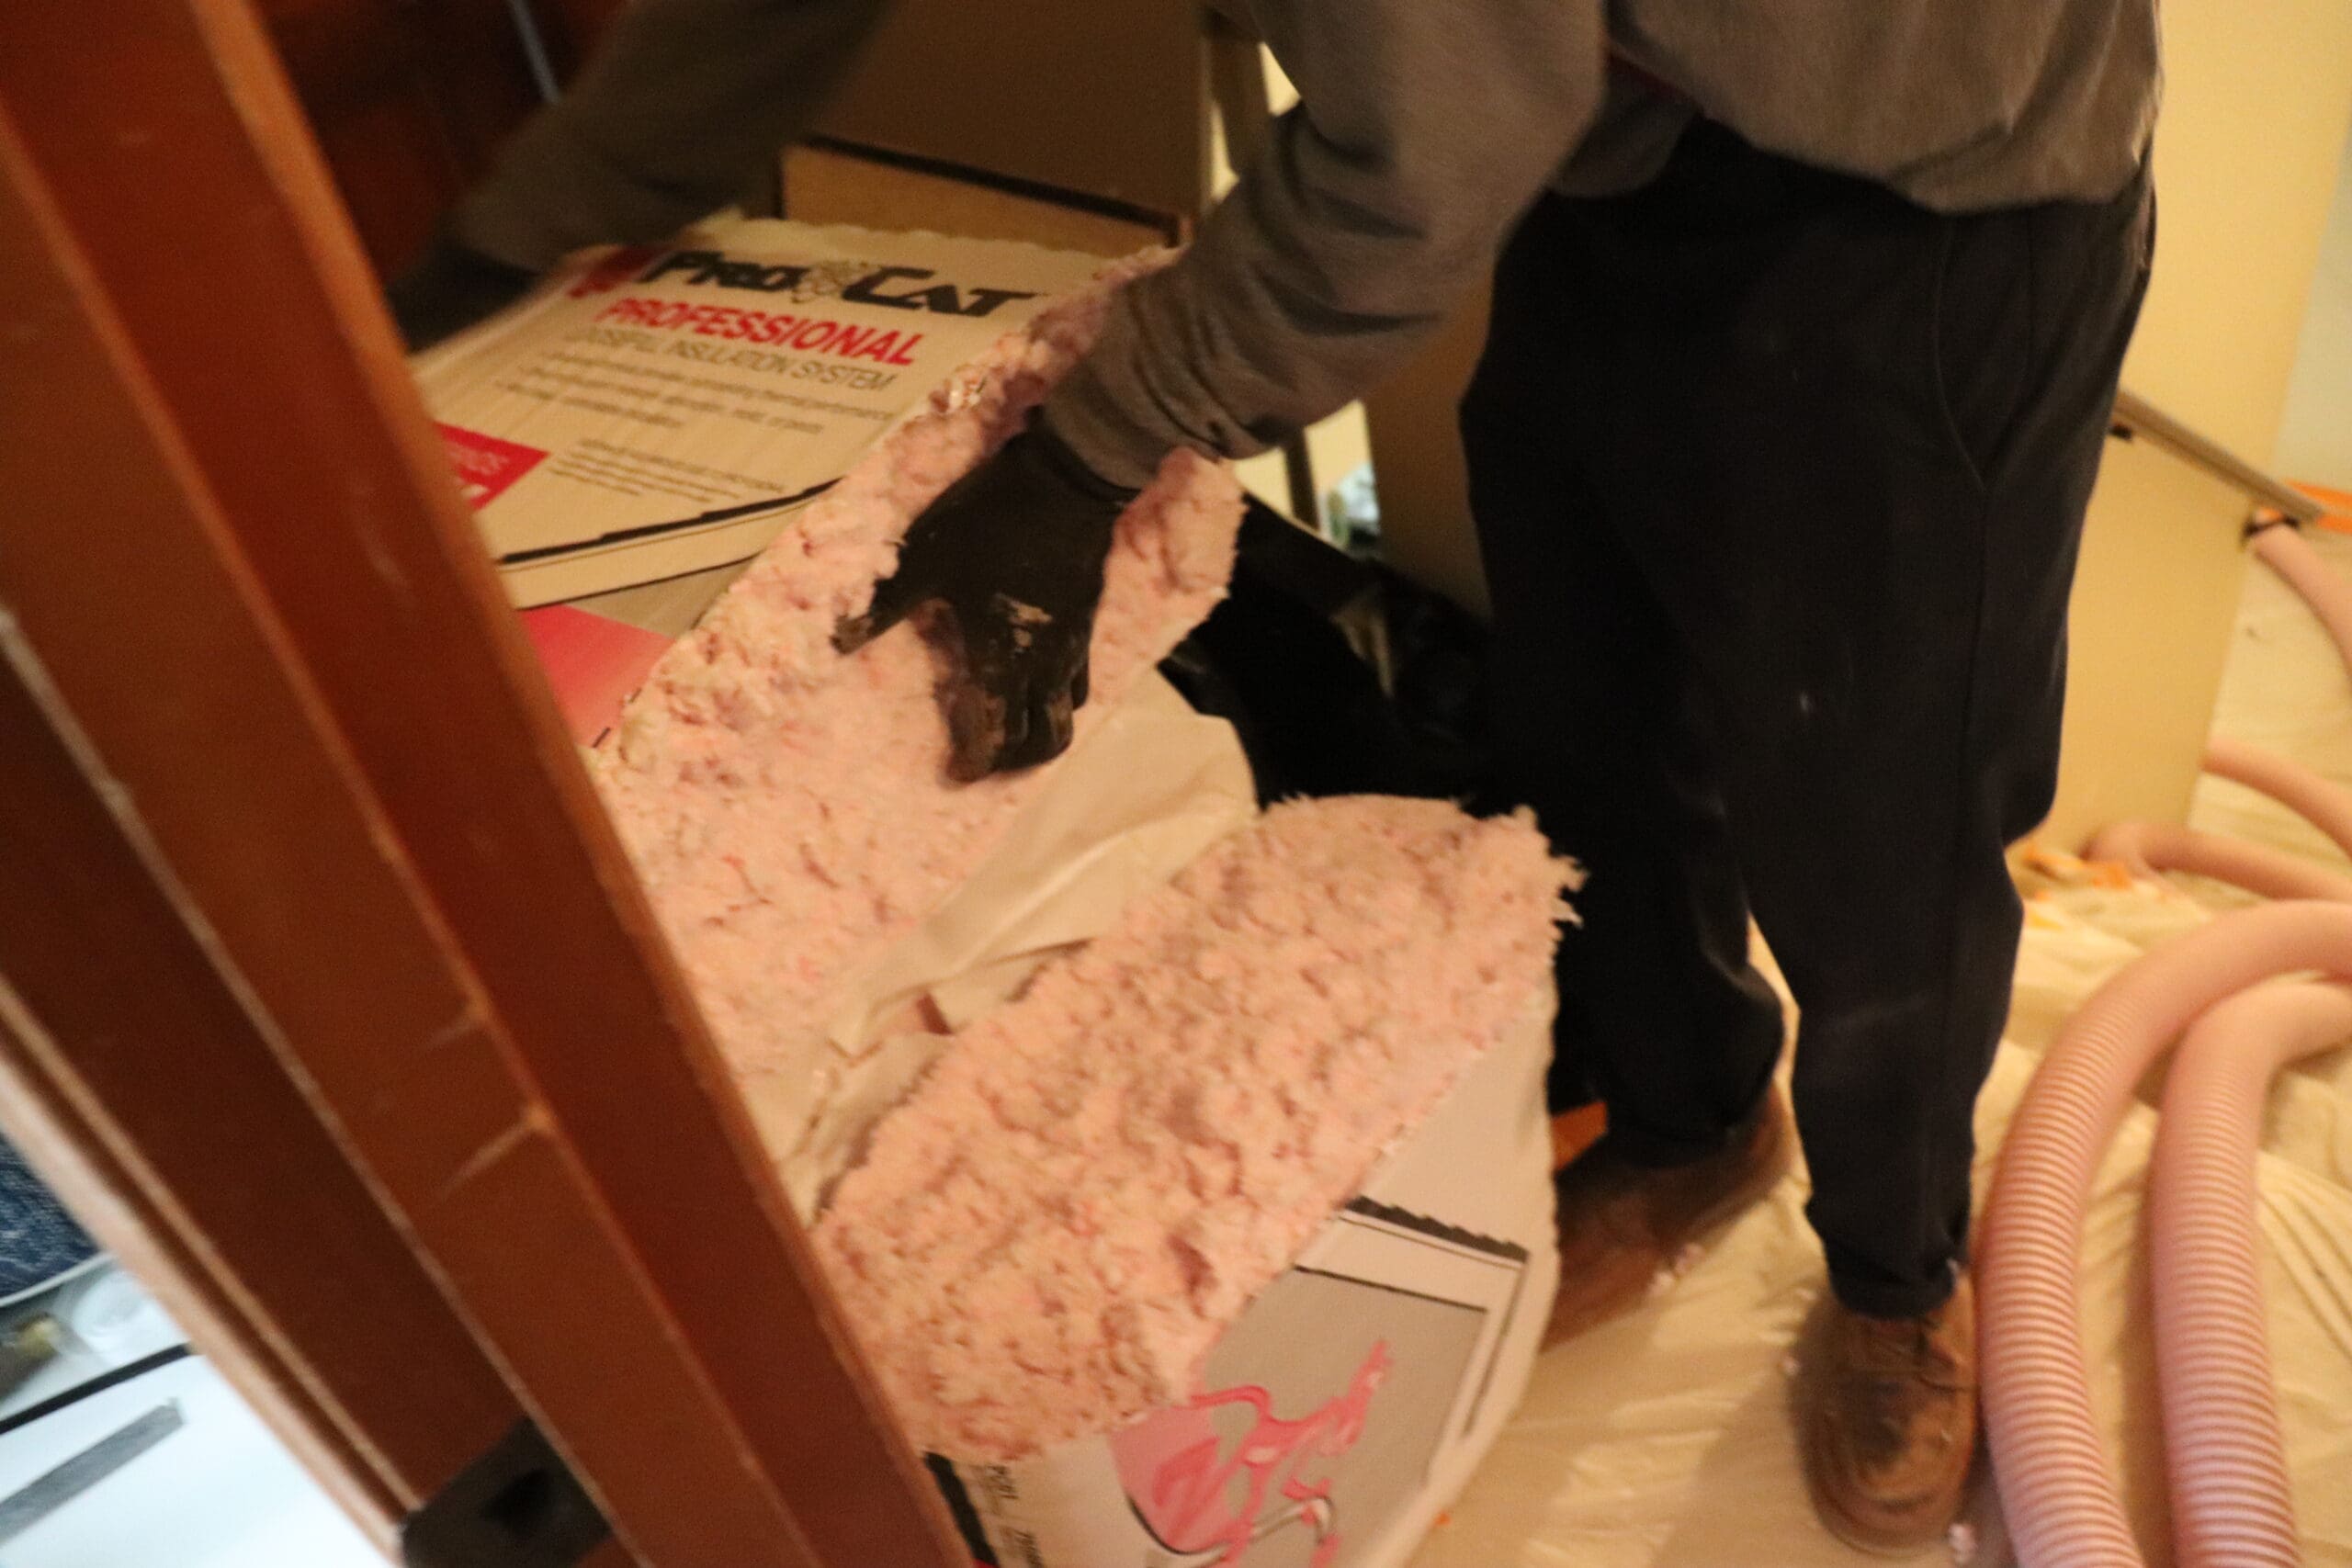 A man is putting pink insulation in a room.